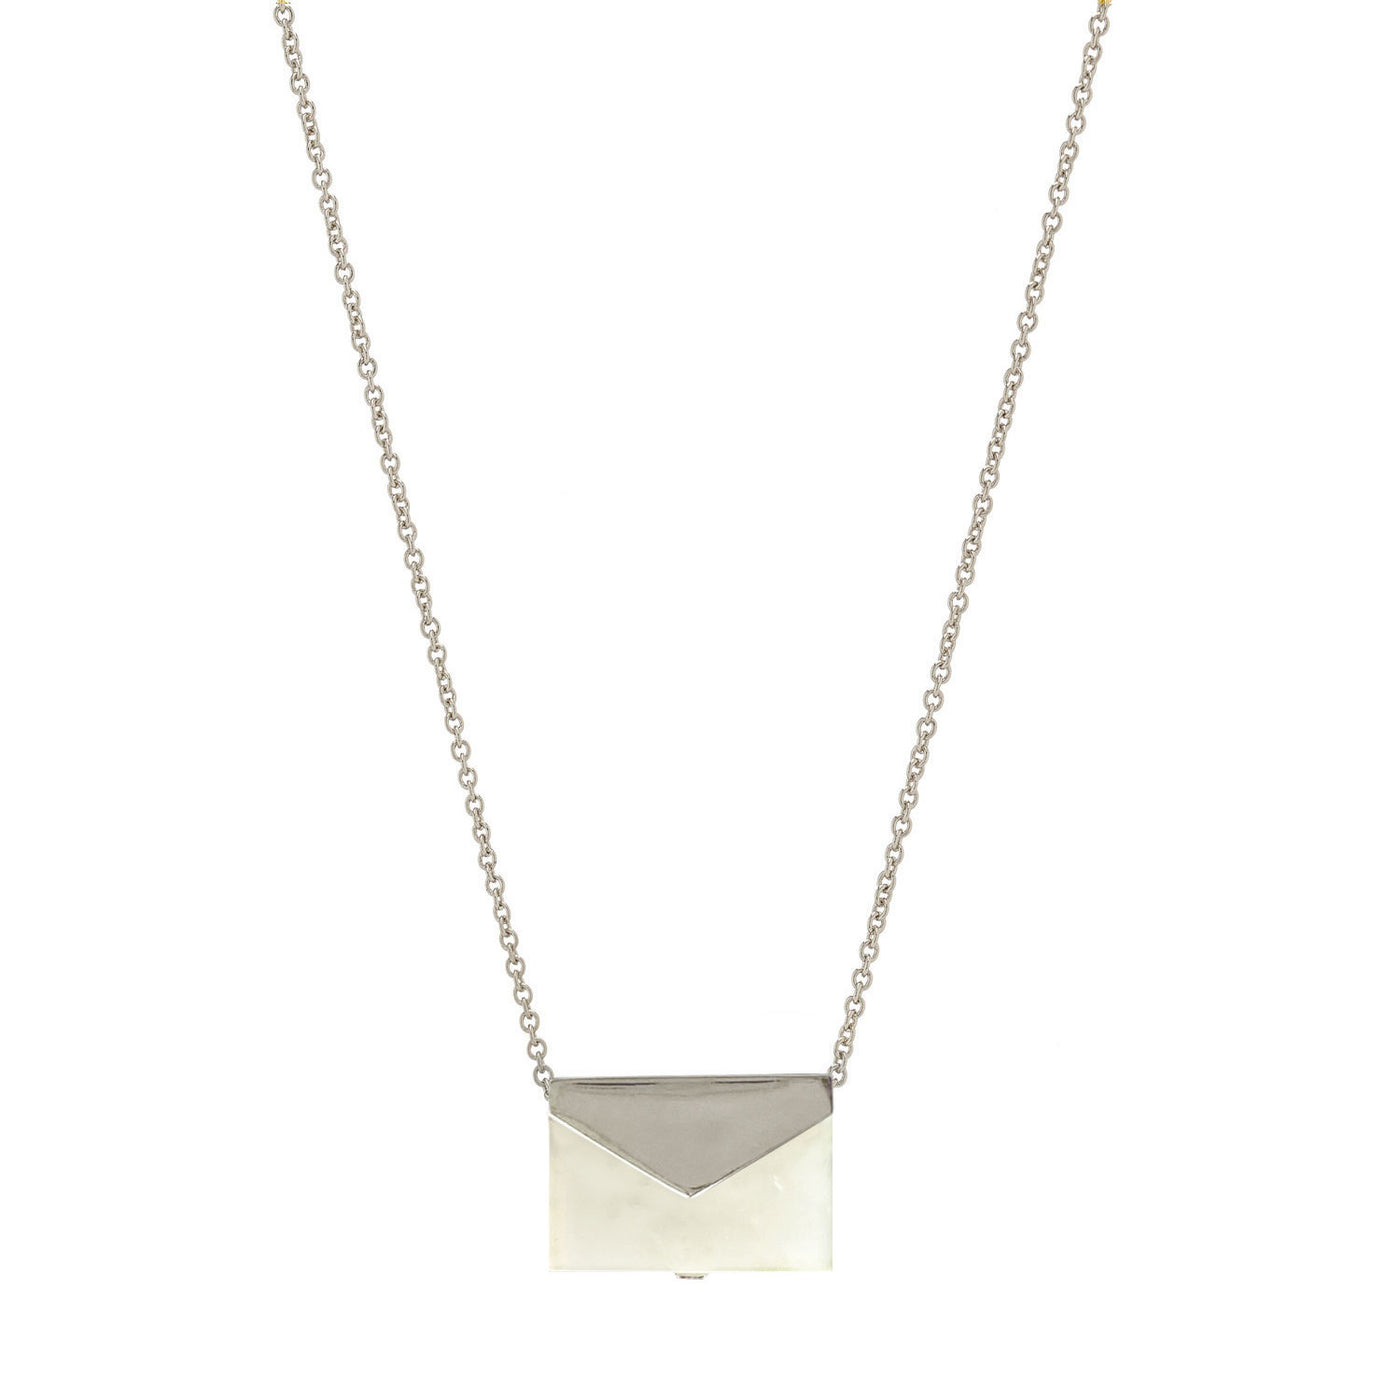 Sterling silver envelope necklace with moonstone